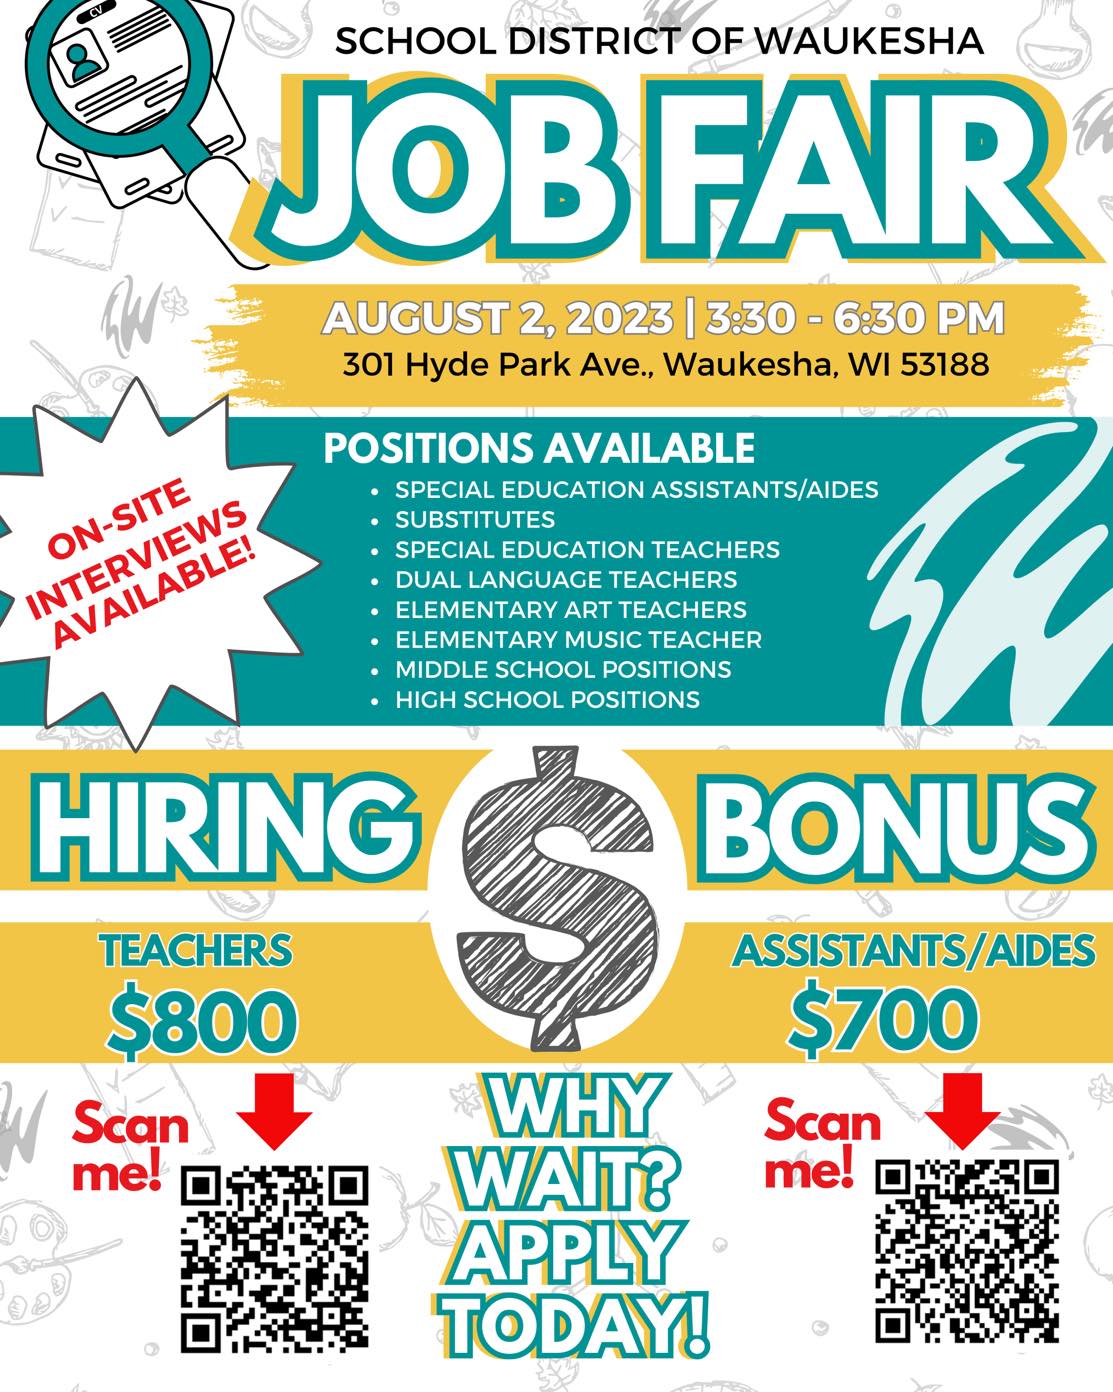 Thumbnail of the SDW Job Fair flyer from their Facebook page